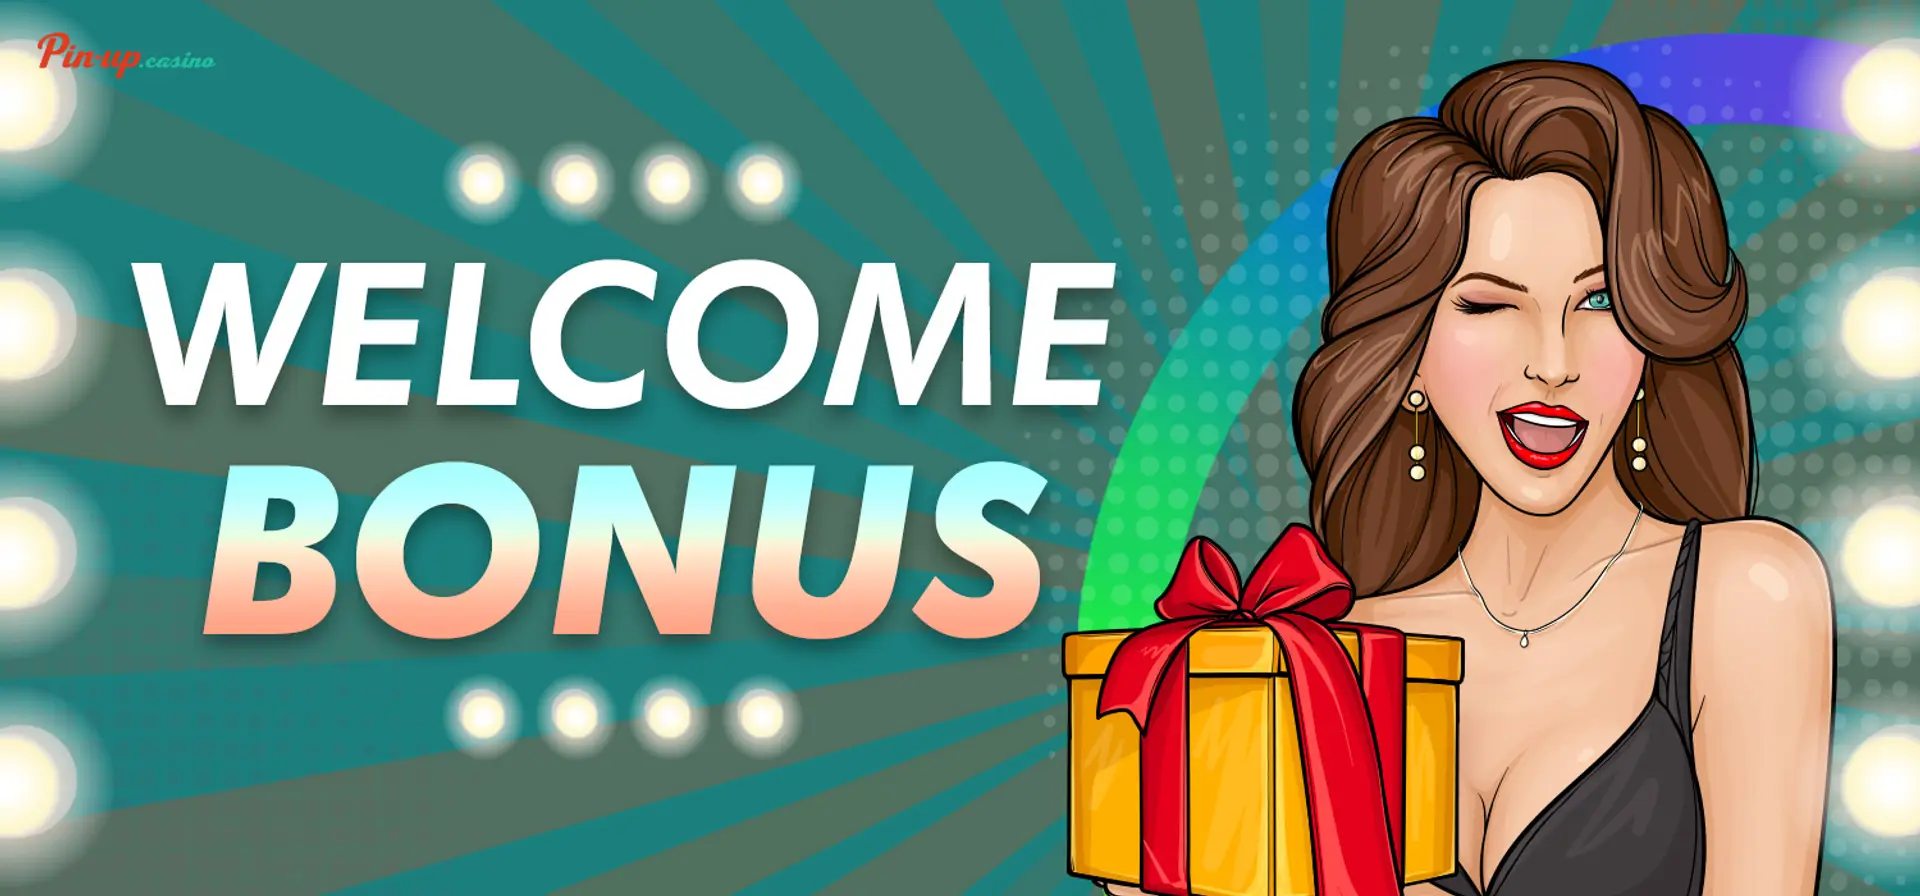 Introduction to Pin Up Casino's Welcome Offer